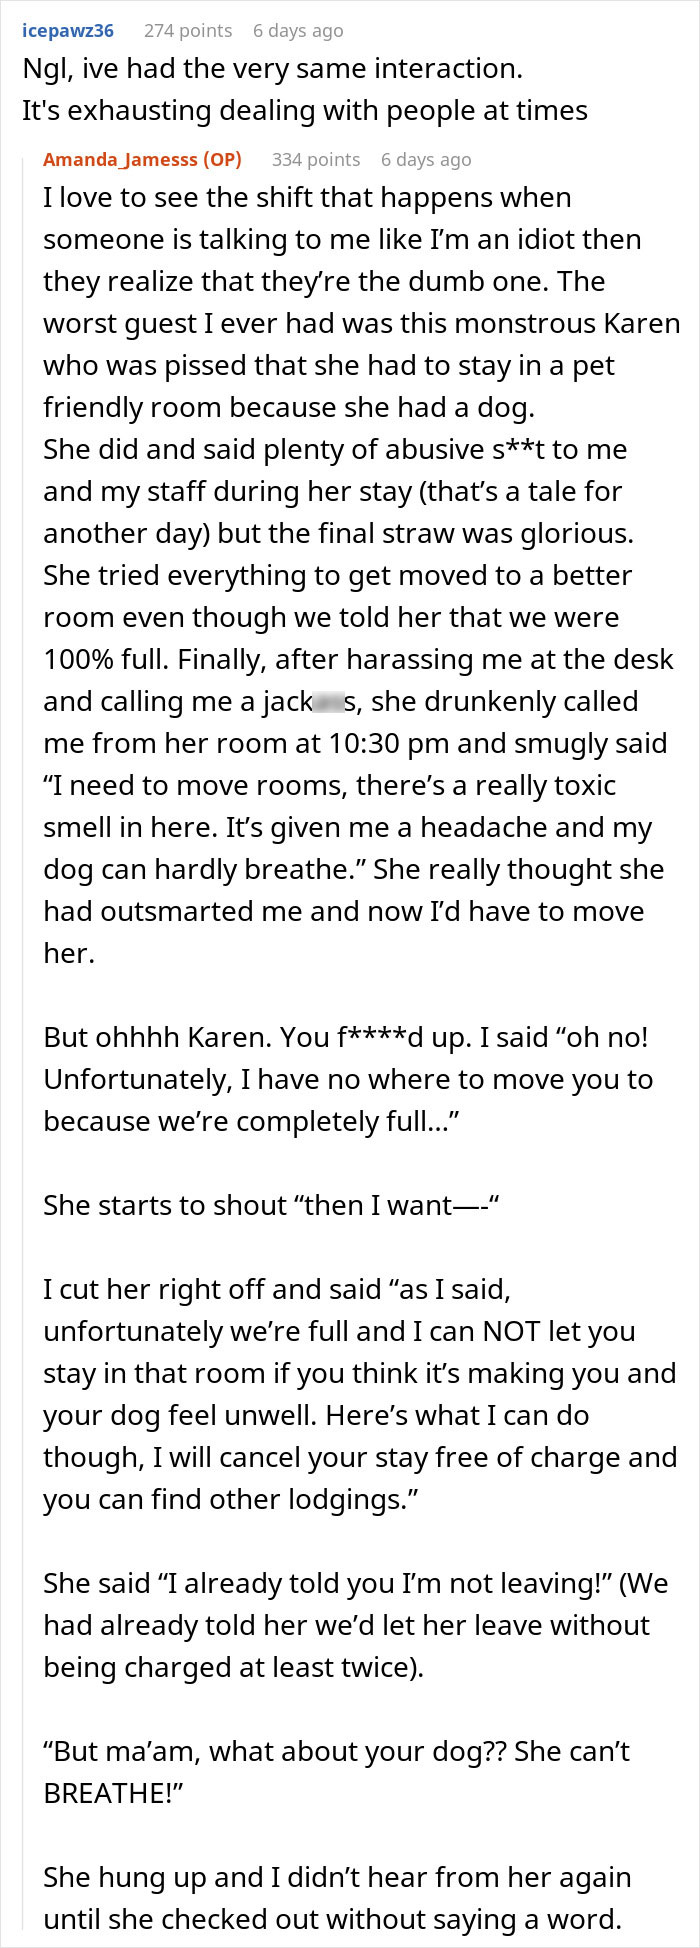 Karen Realizes Her Mistake After Lashing Out At Hotel Employee, Walks Away Without A Word